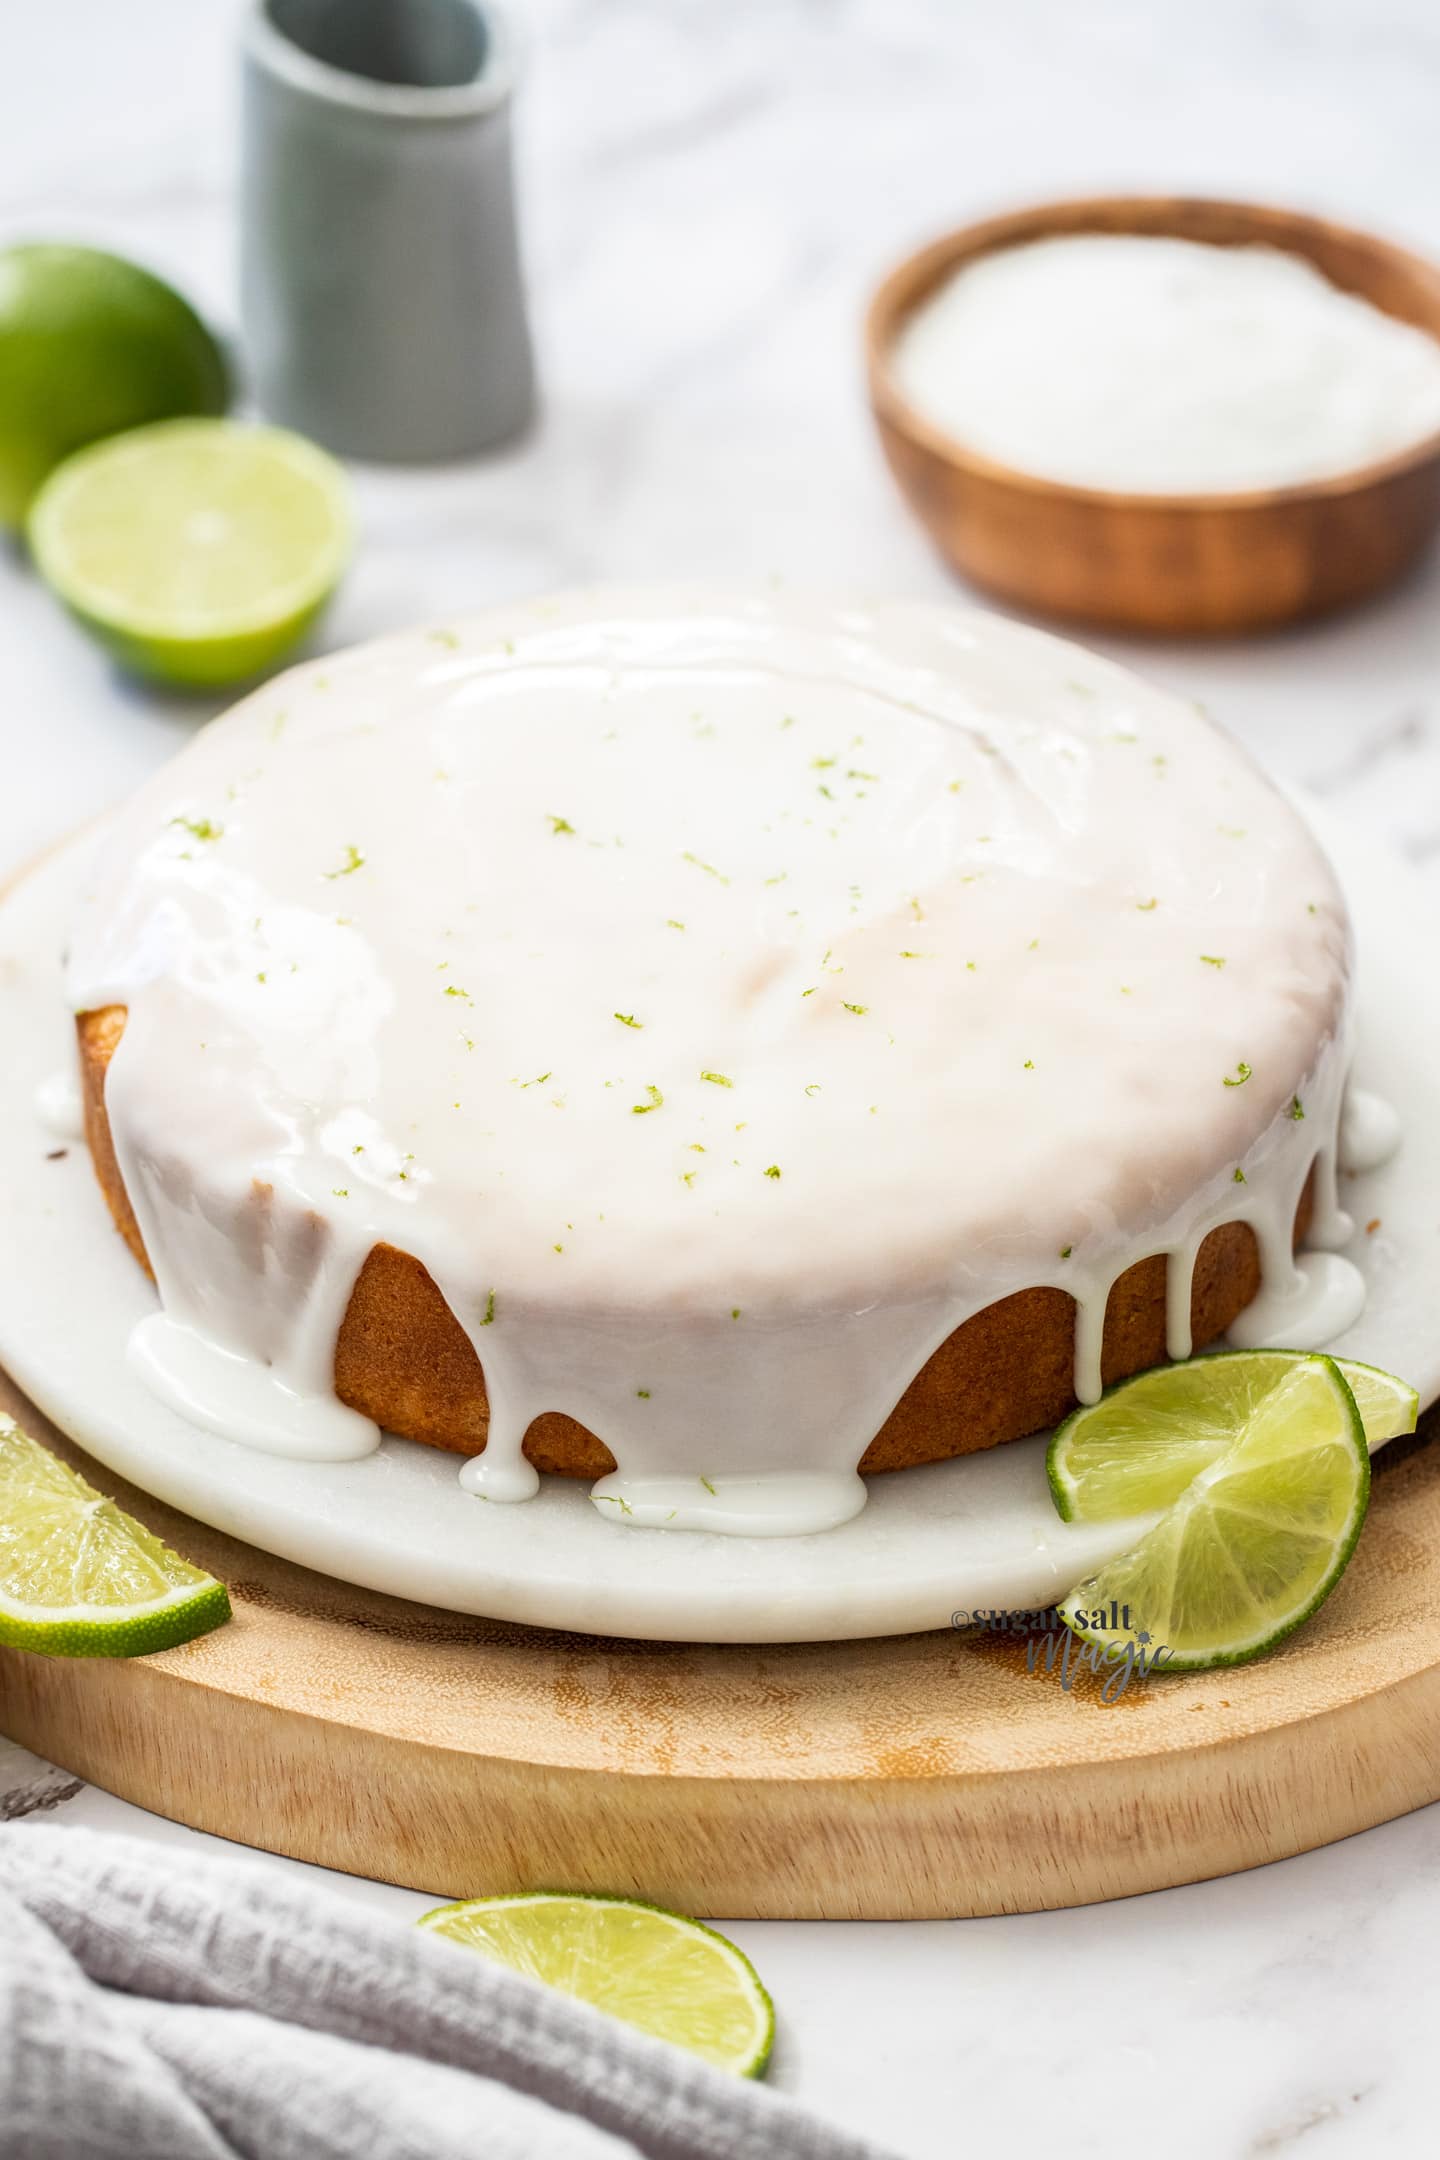 A whole cake covered in lime glaze on a marble cake plate.